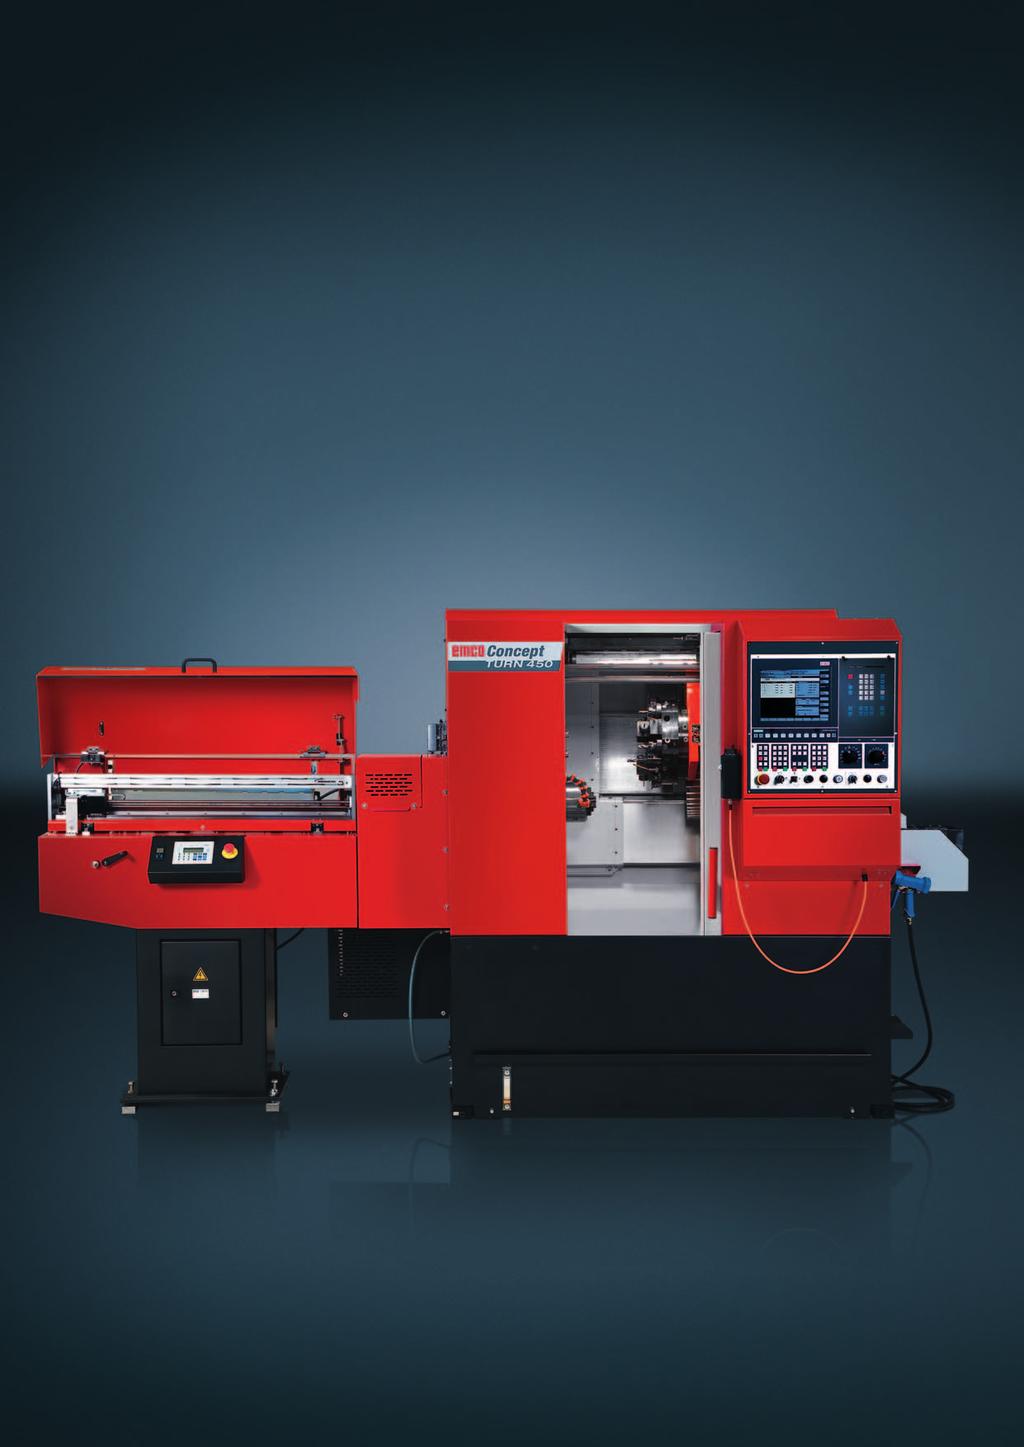 Concept TURN 450 A new dimension of CNC training suitable for industrial purposes.